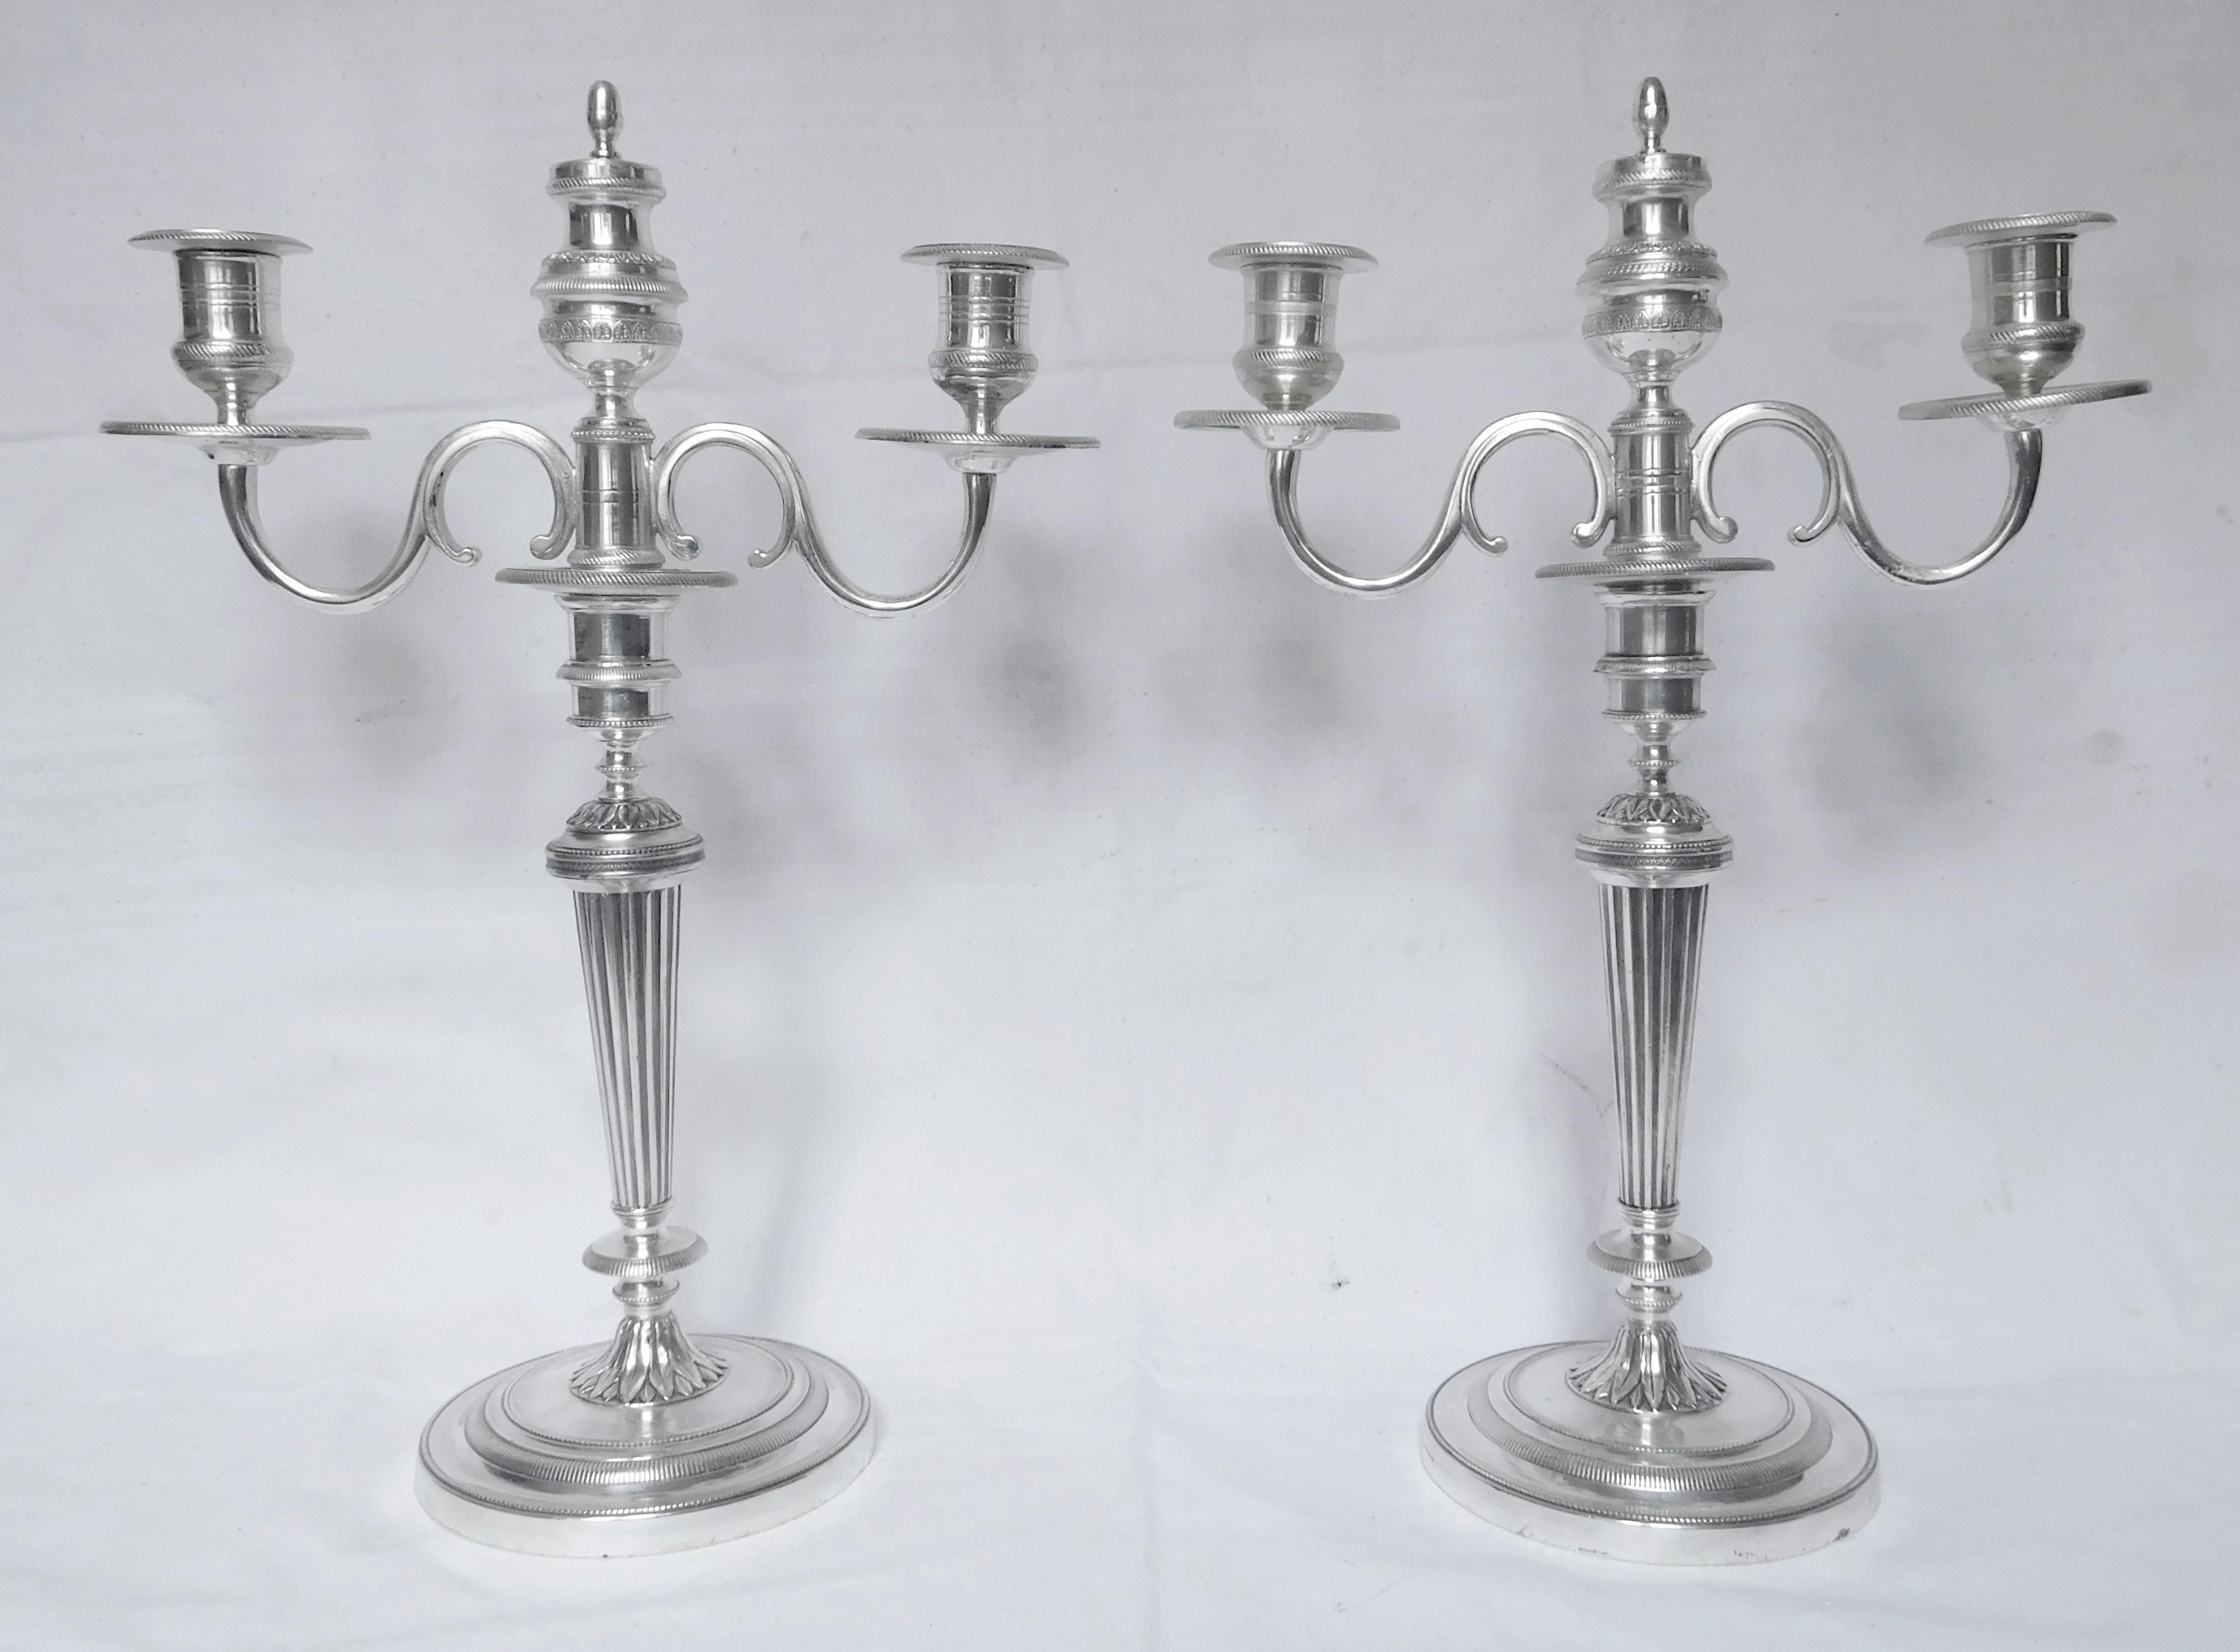 Louis XVI Pair of Tall Empire silver plate Candelabras by JG Galle - early 19th century For Sale